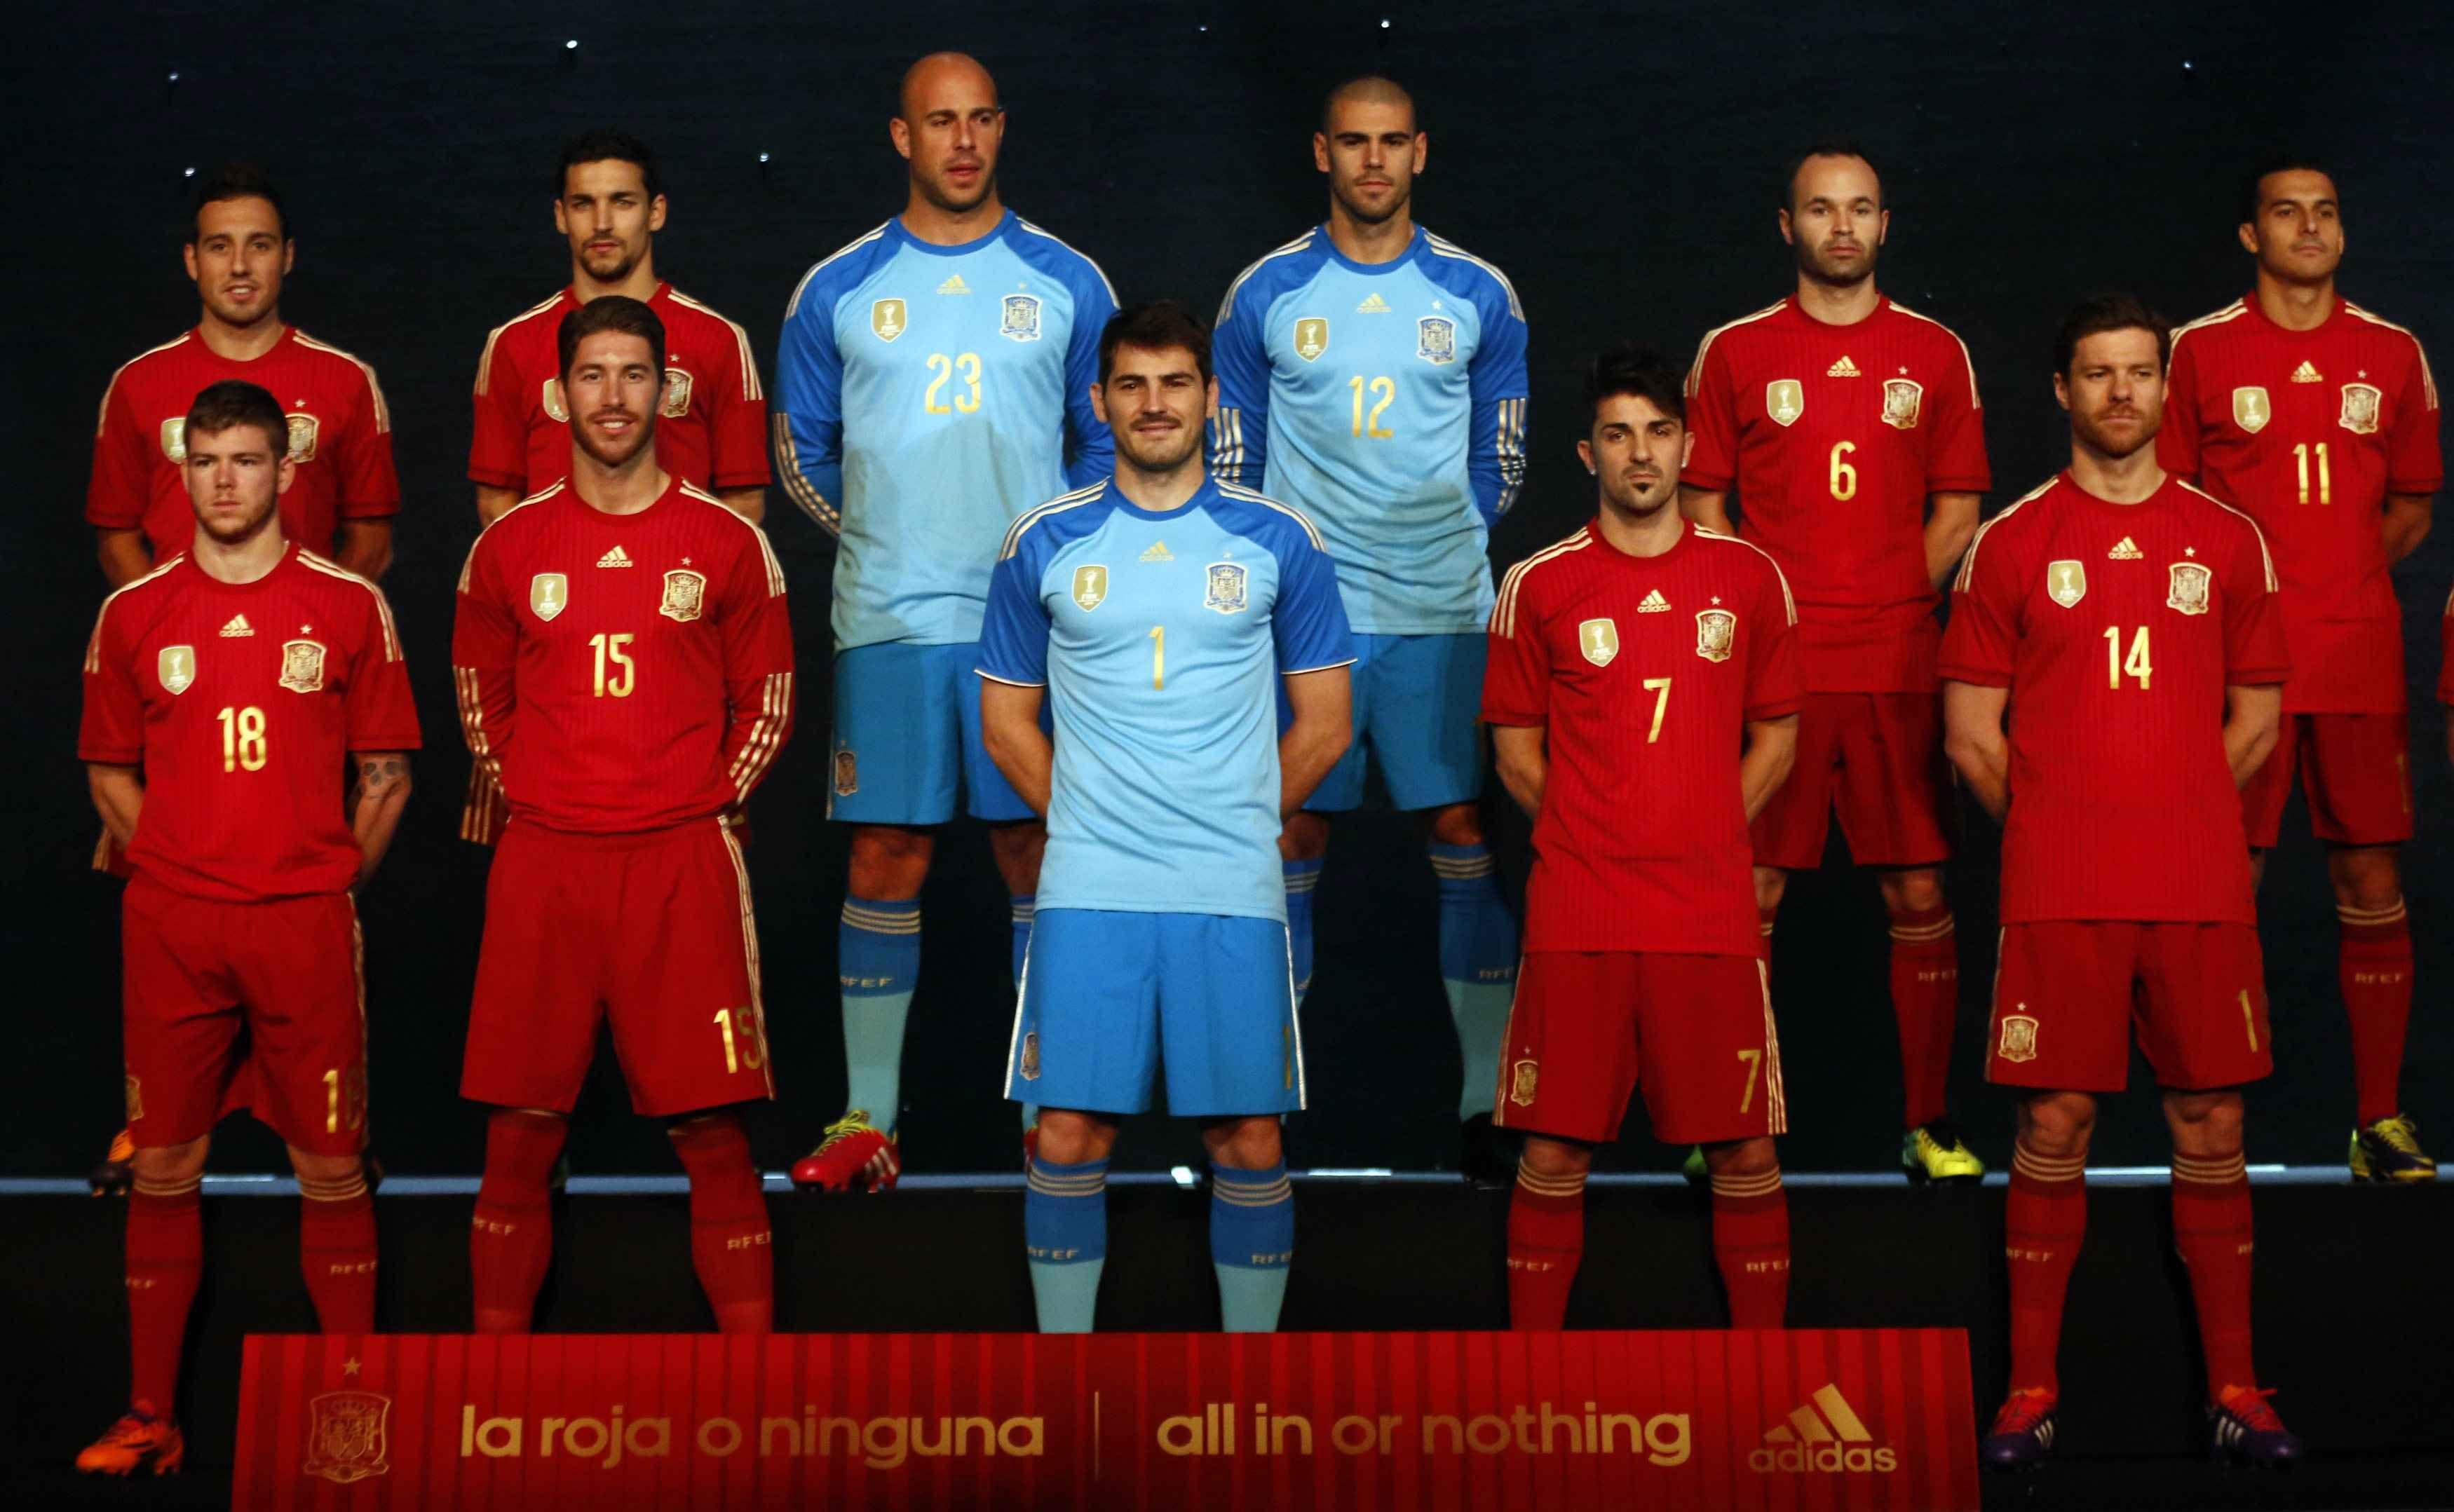 Spain Team 2014 World Cup Home Kit Wallpaper Wide or HD. Sports